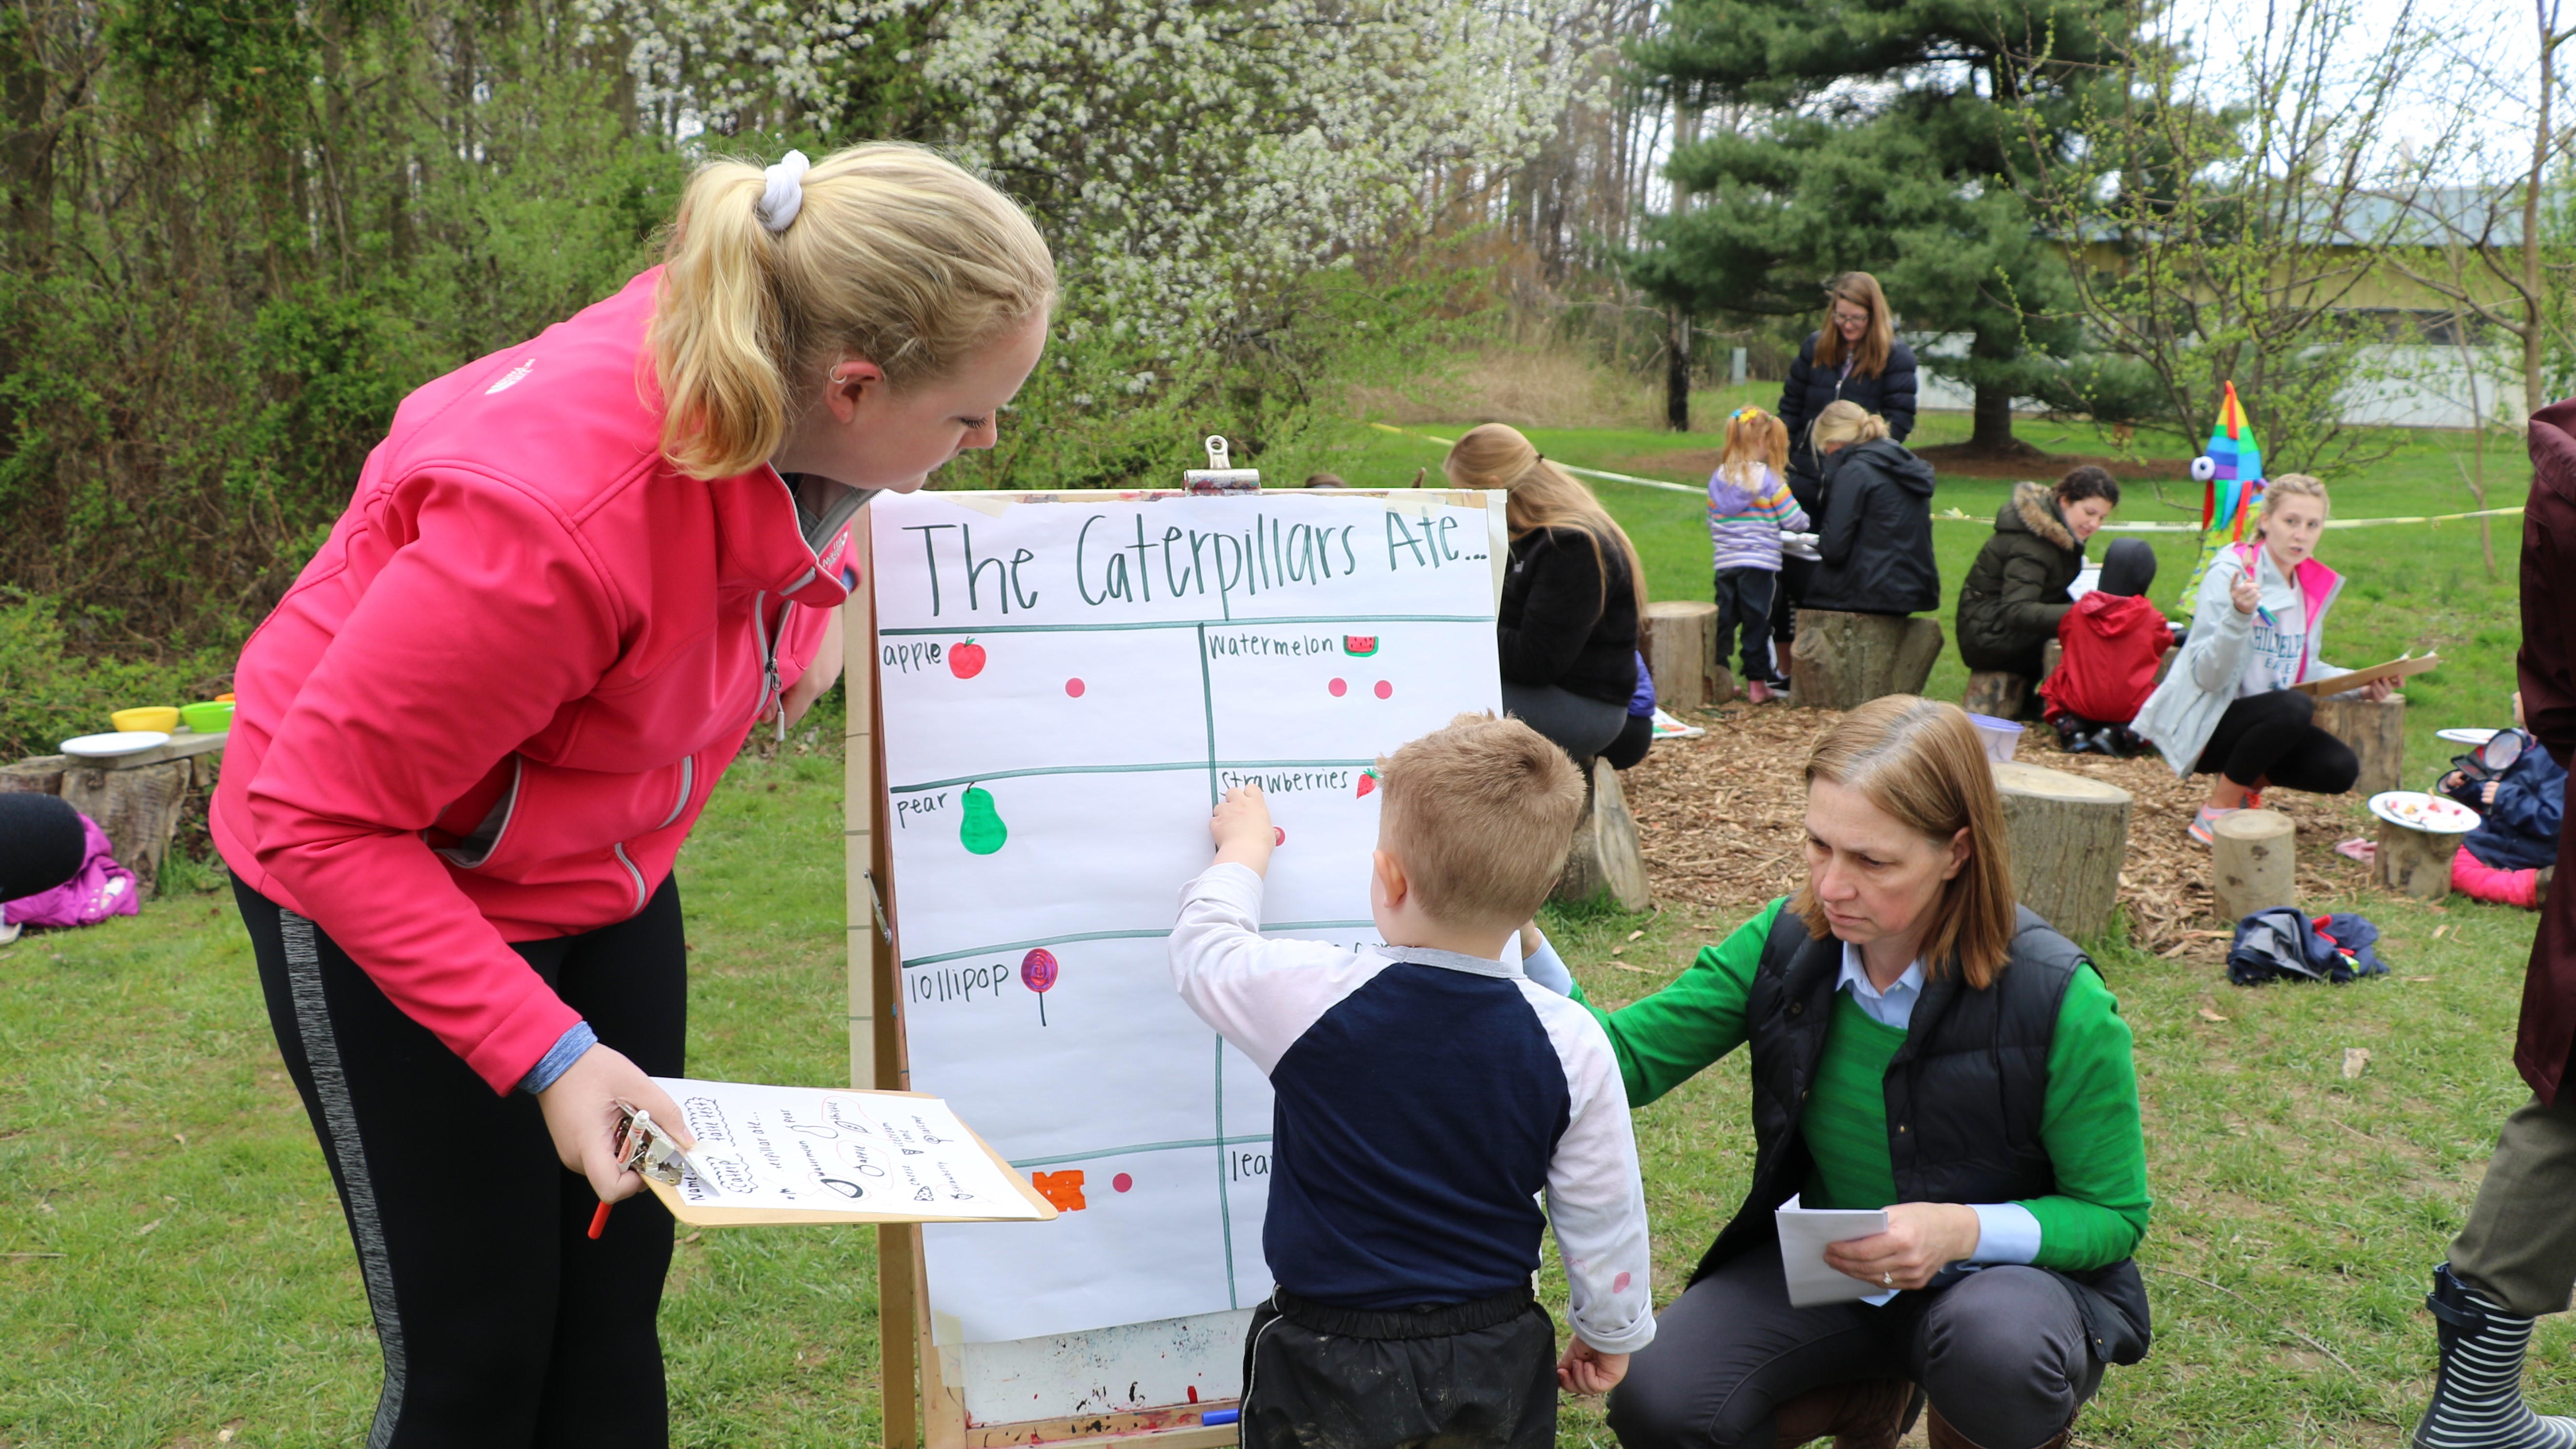 A student teacher leads a child in a science activity about caterpillars using a poster board outside.